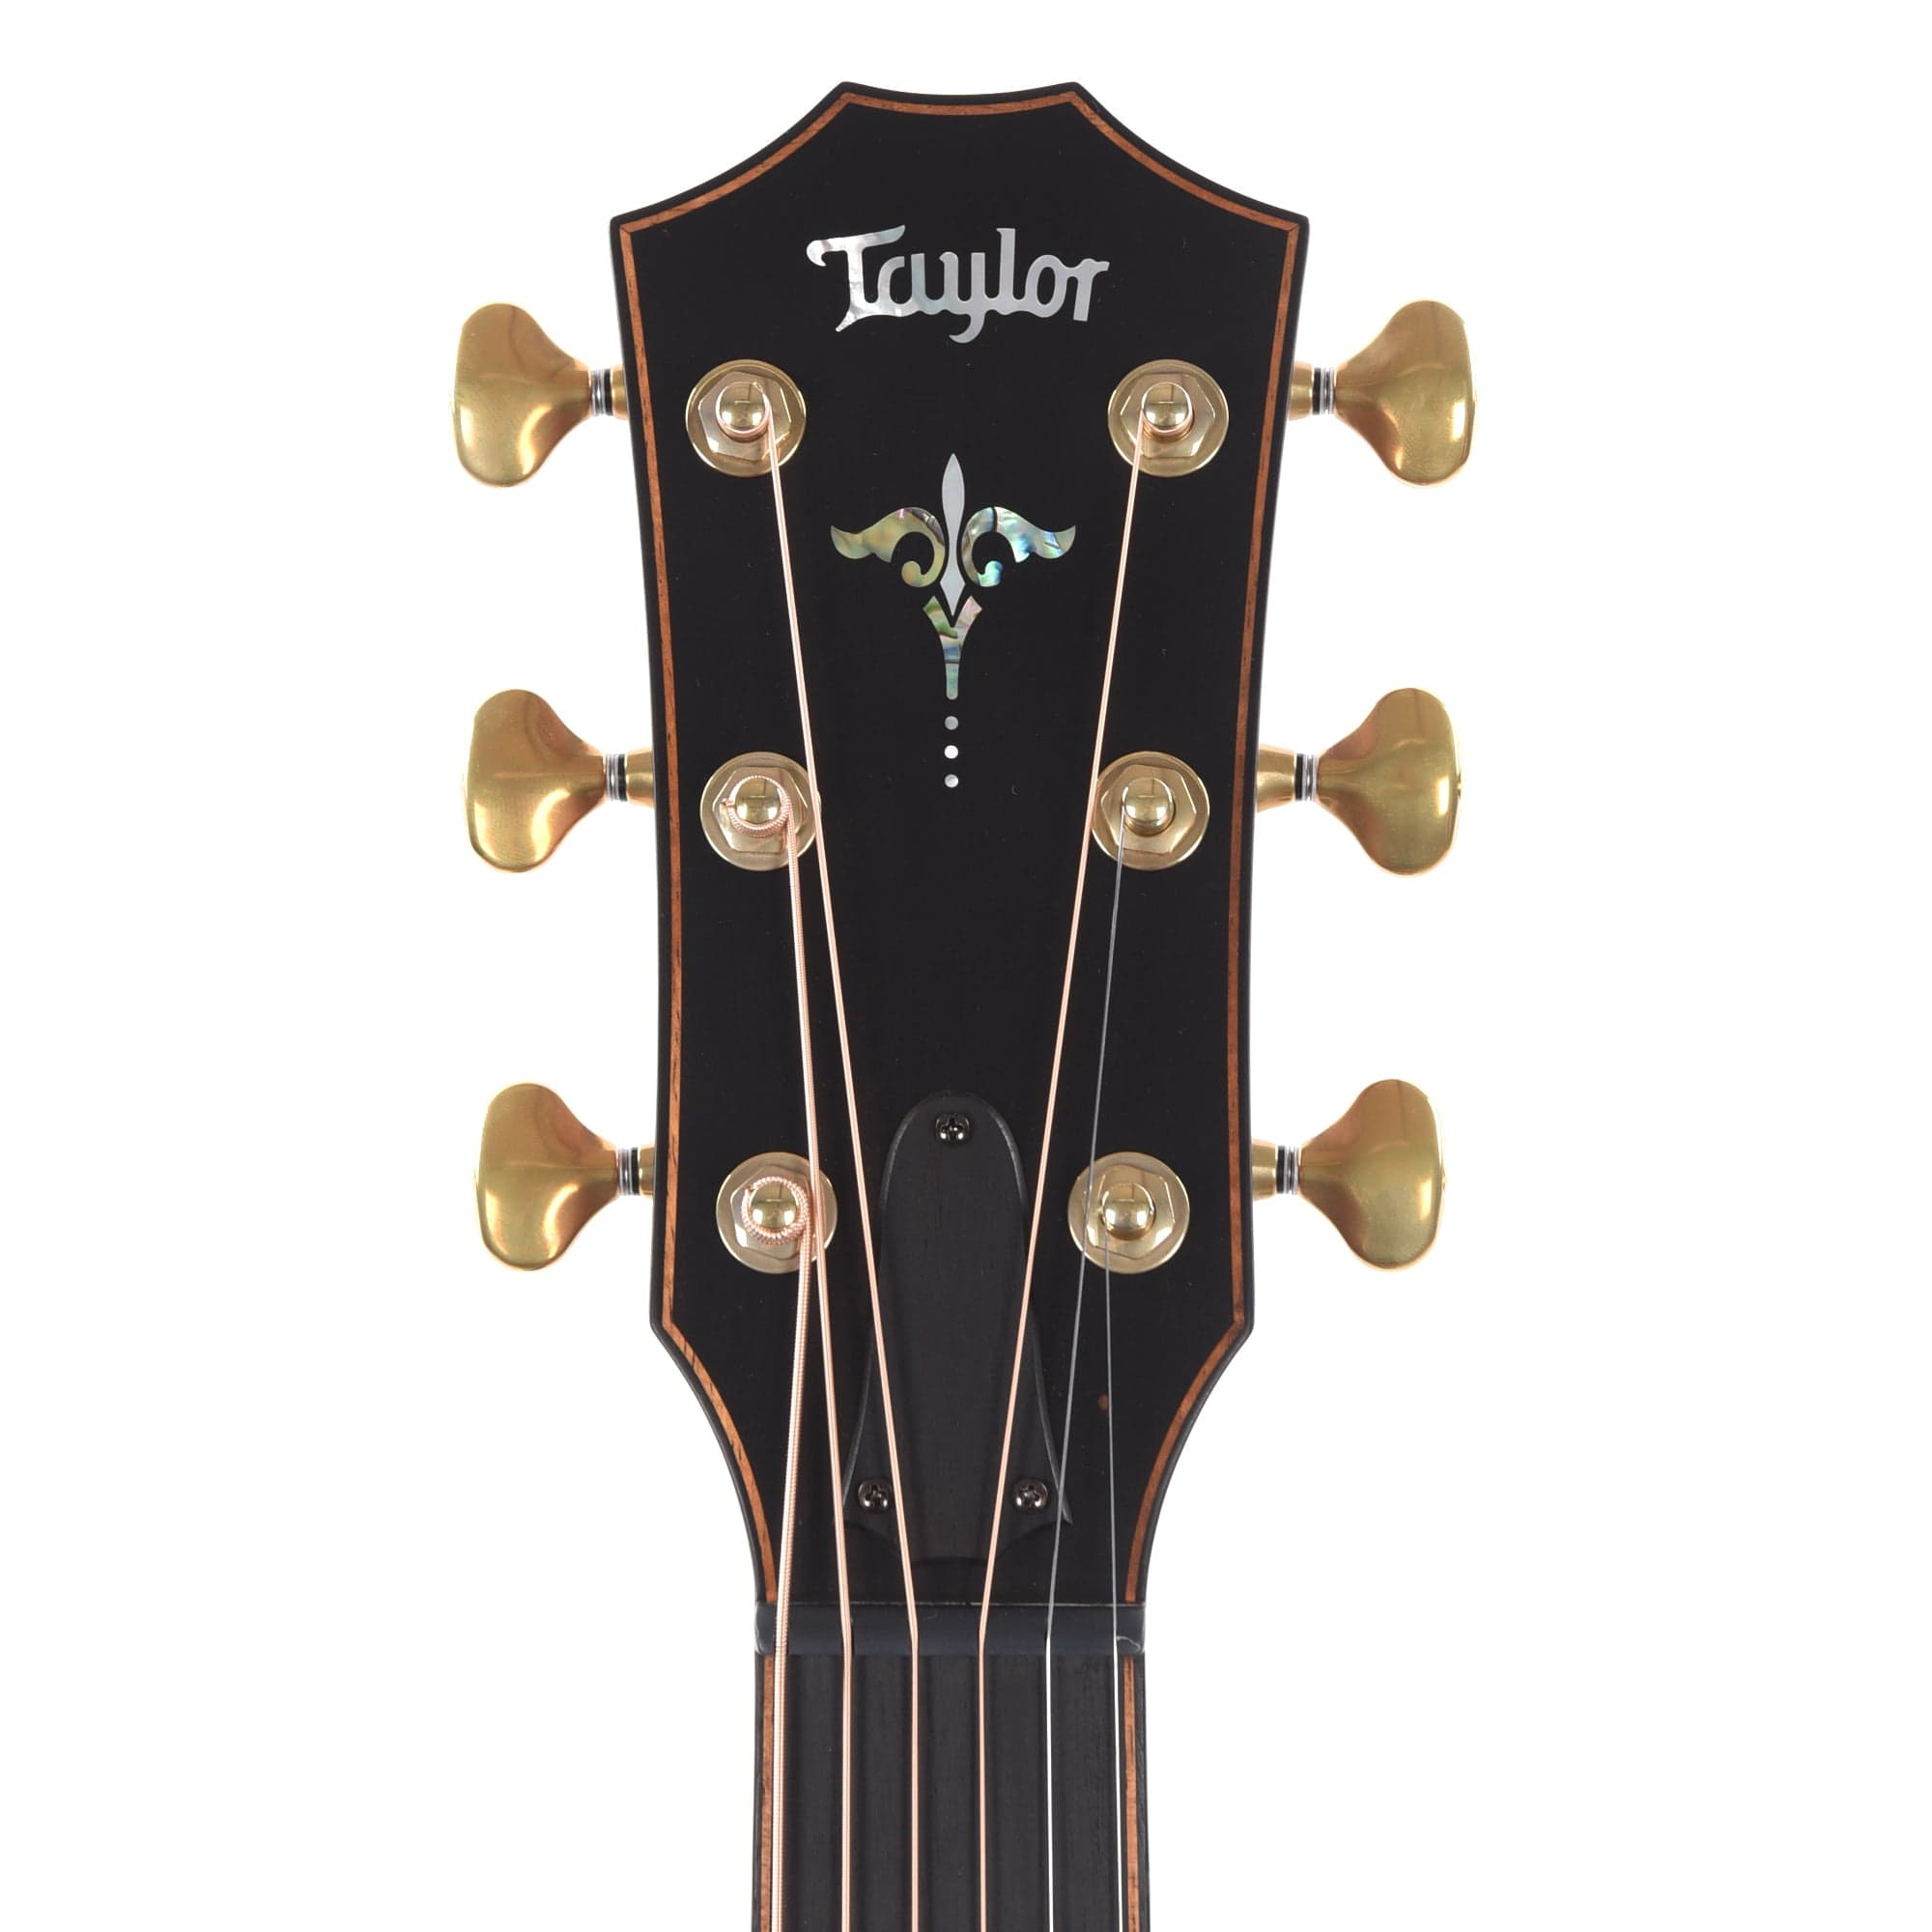 Taylor Builder's Edition 912ce Grand Concert Lutz Spruce/Rosewood Natural ES2 Acoustic Guitars / OM and Auditorium